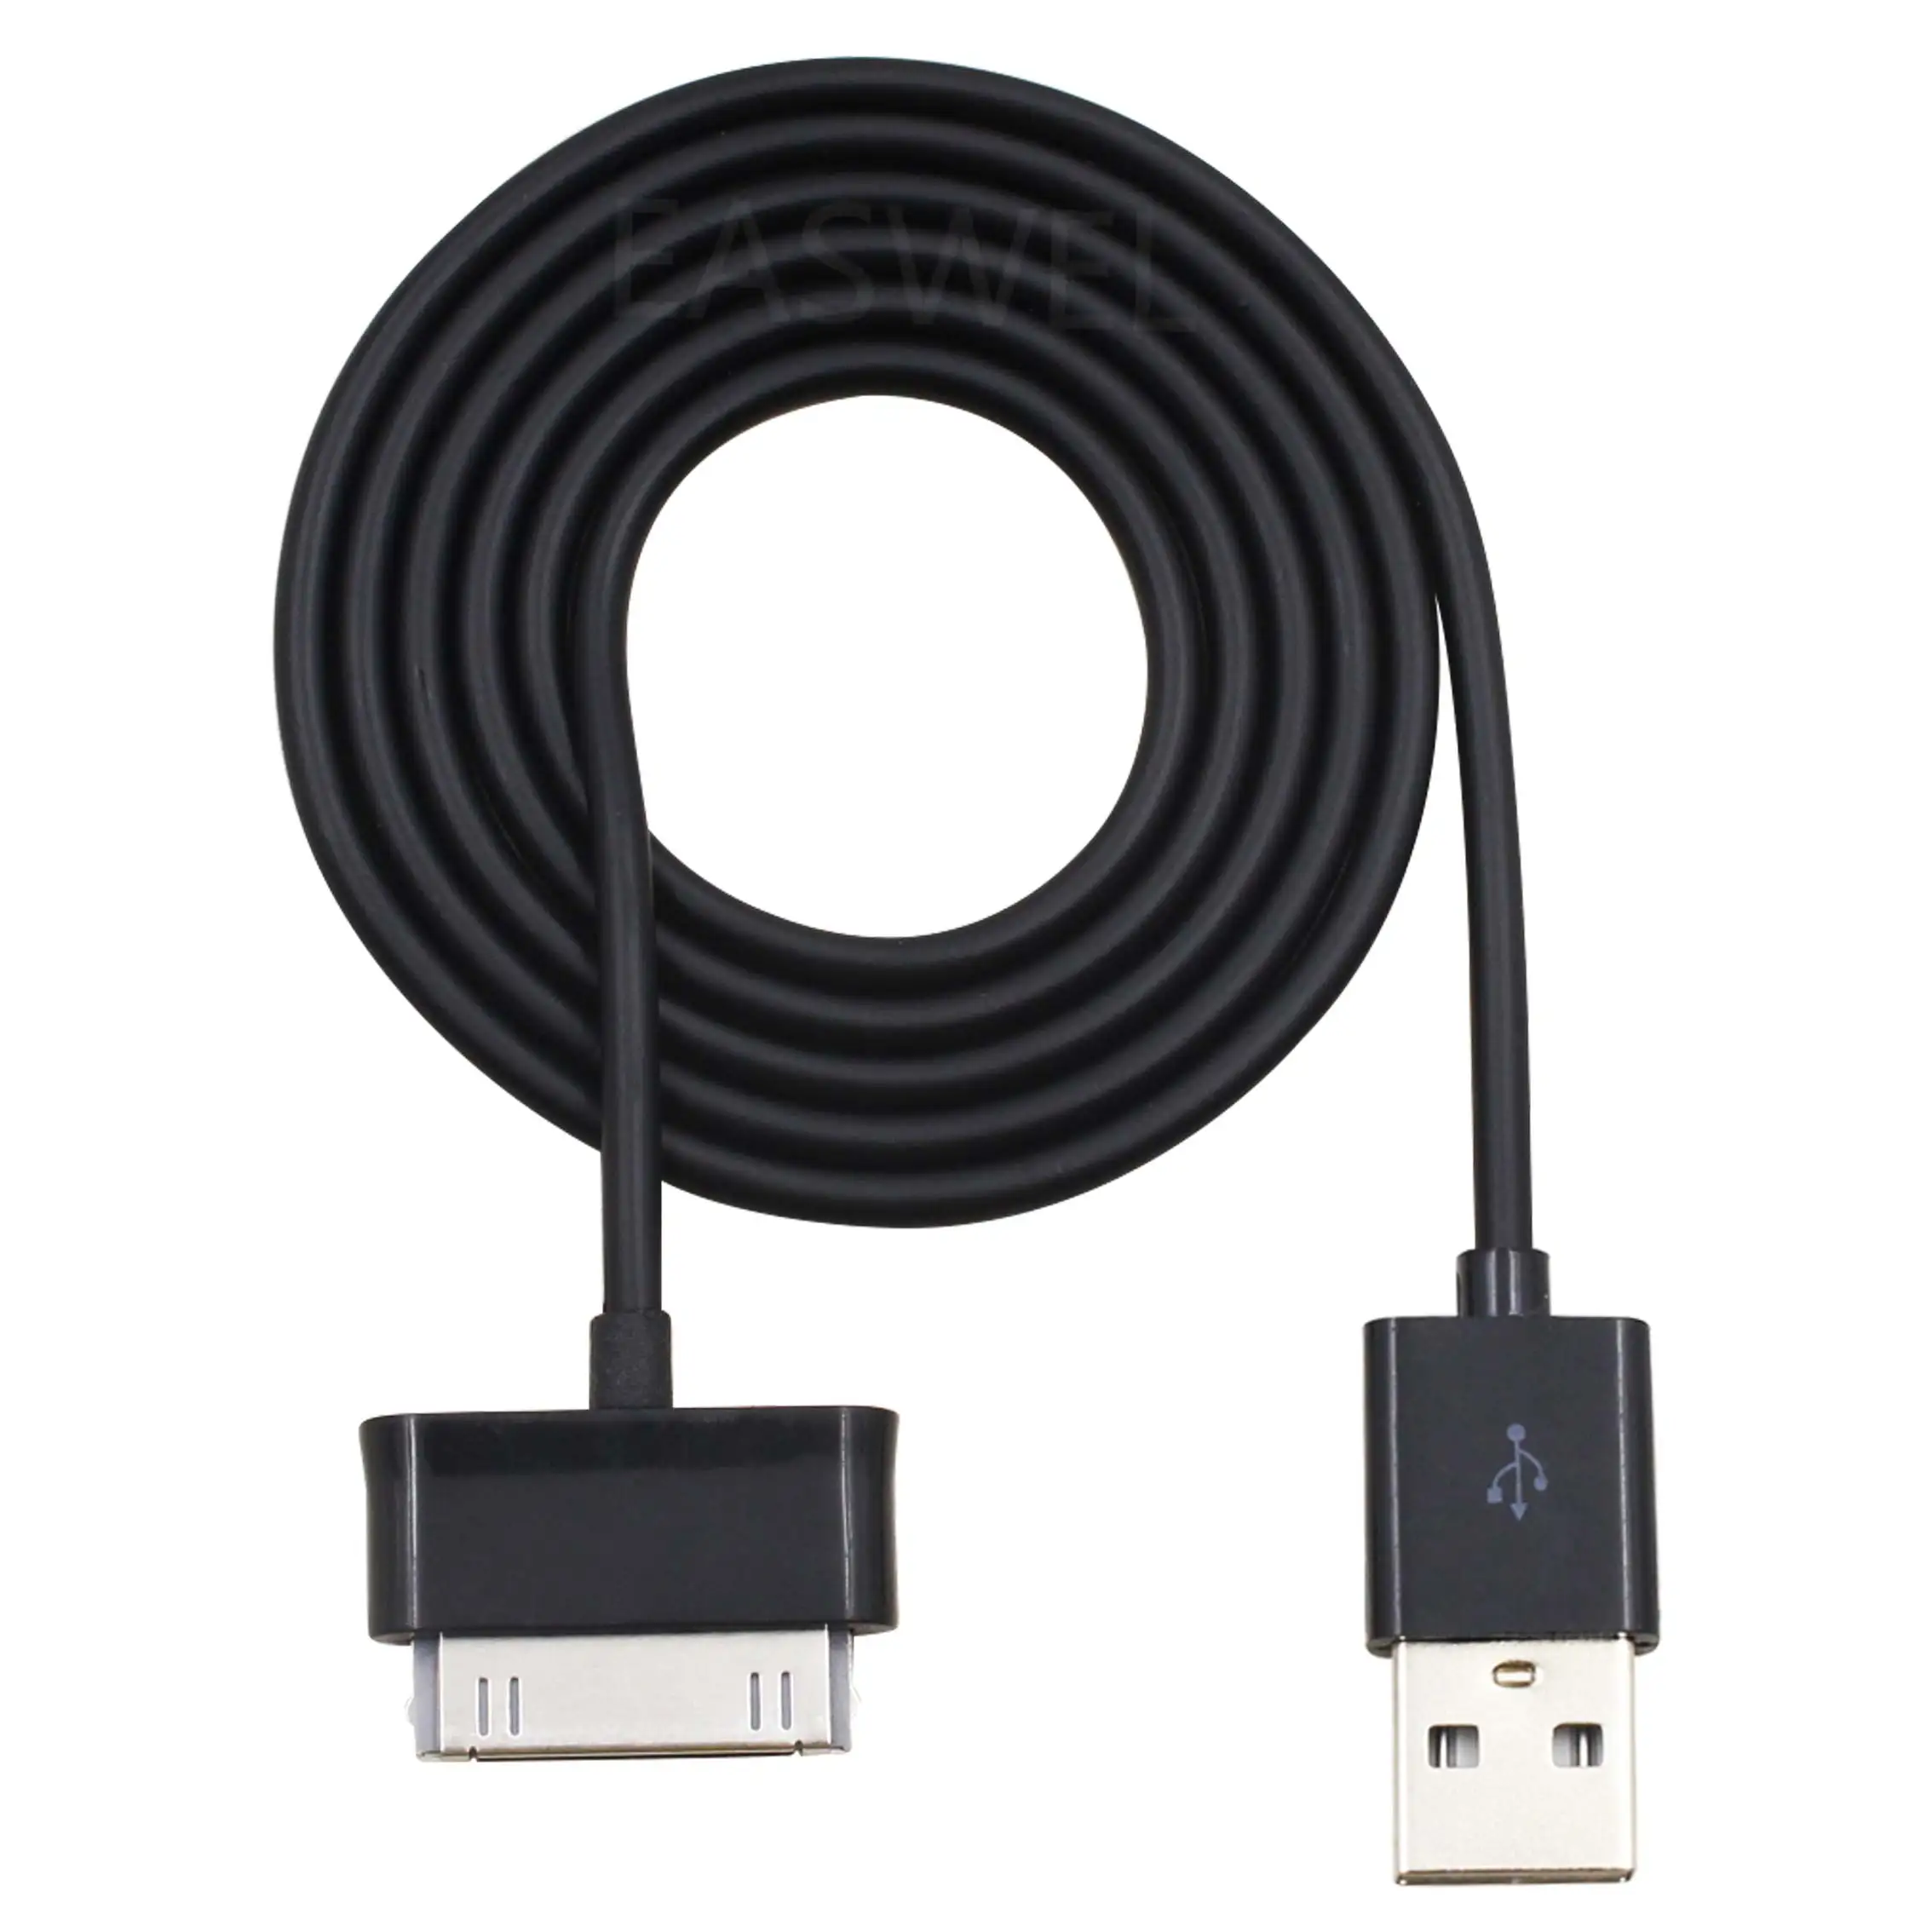 GSParts USB Data Charger Cable Cord for Samsung Galaxy Tab2 Tab 2 GT-P3113TS Tablet 